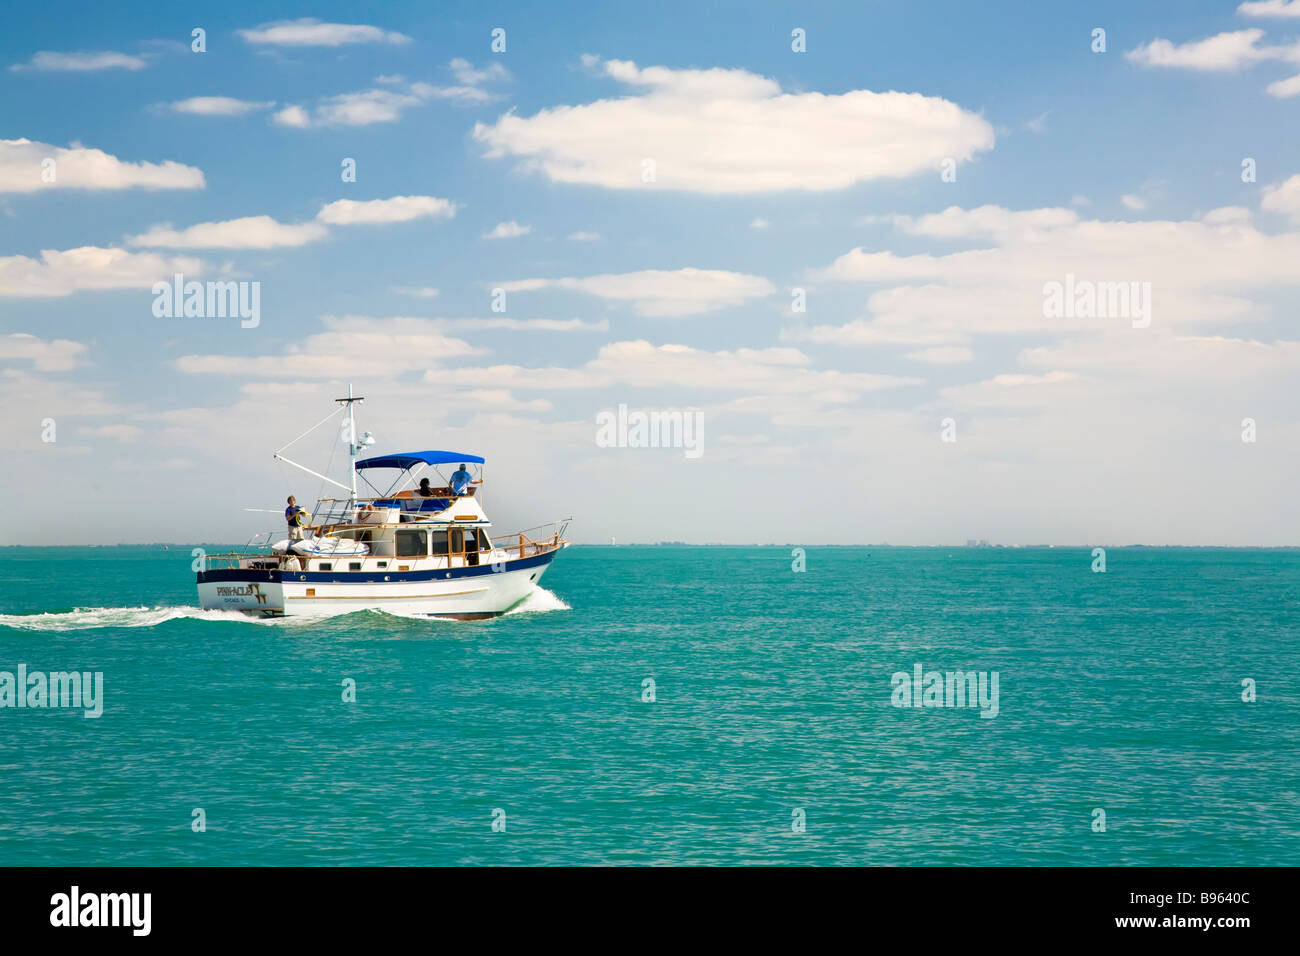 Yacht in Gulf of Mexico in entrance to Tampa Bay from Gulf of Mexico Stock Photo